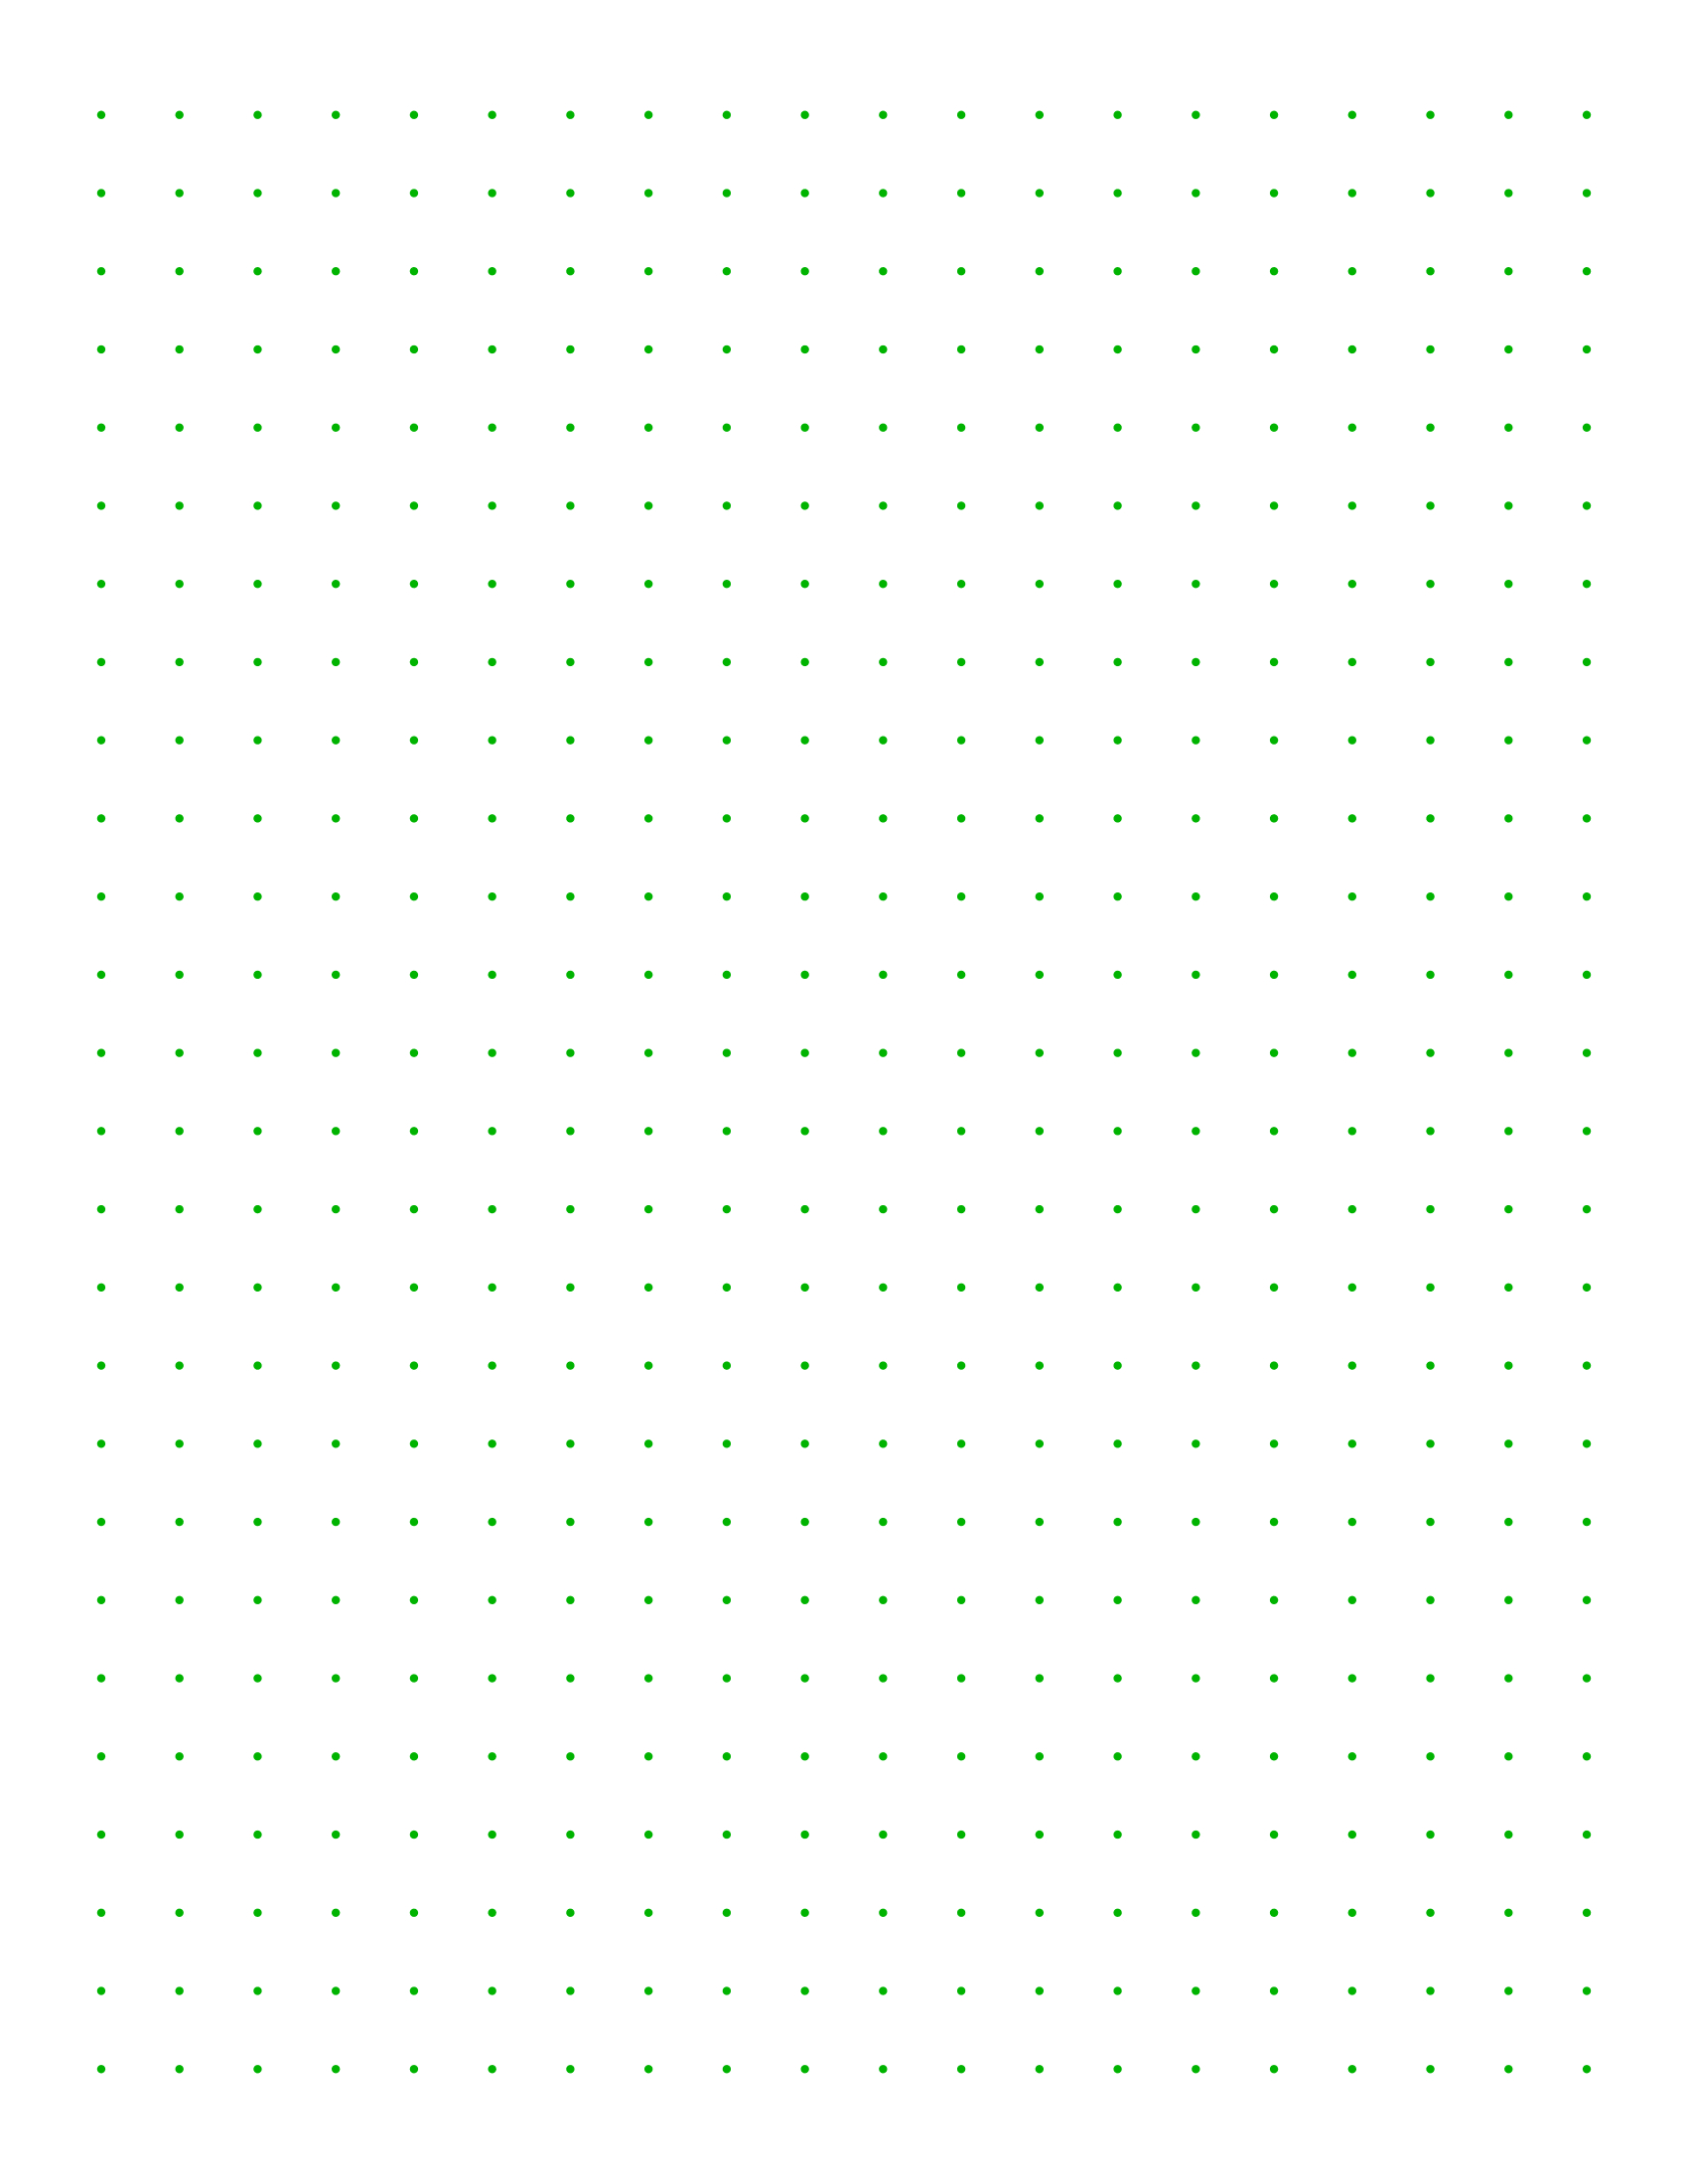 Free Online Graph Paper / Square Dots - Free Printable Graph Paper For Elementary Students